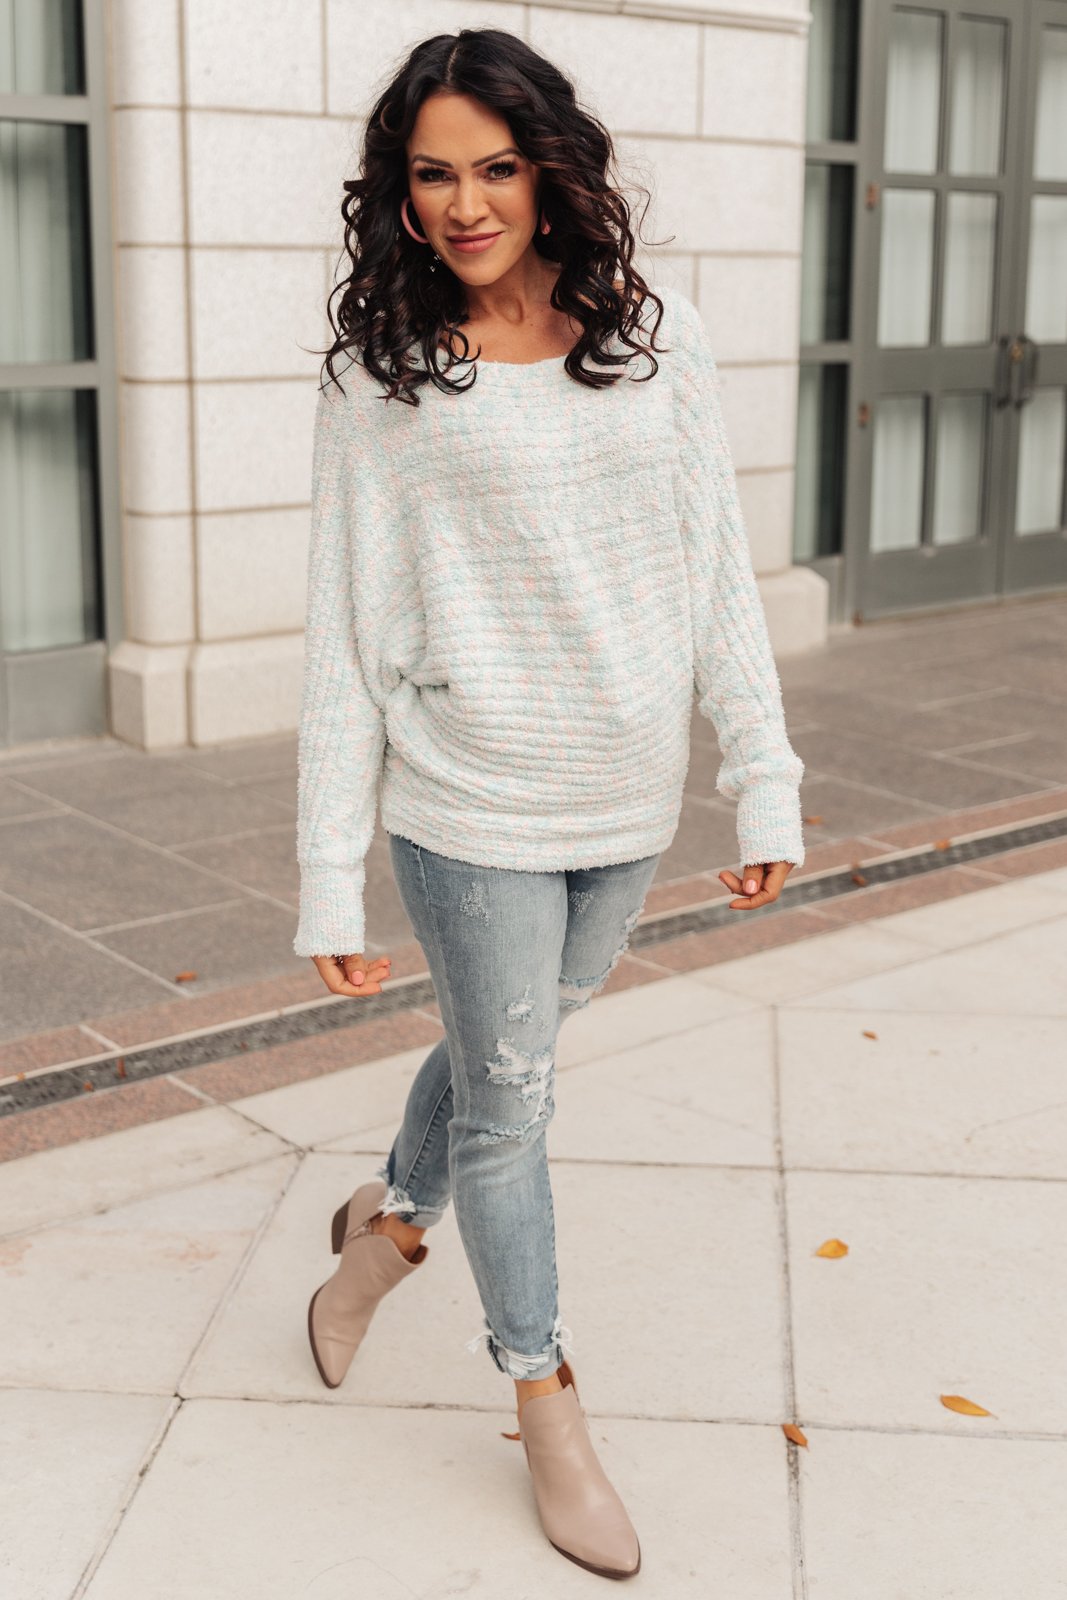 Cotton Candy Dream Sweater in Pink/Blue